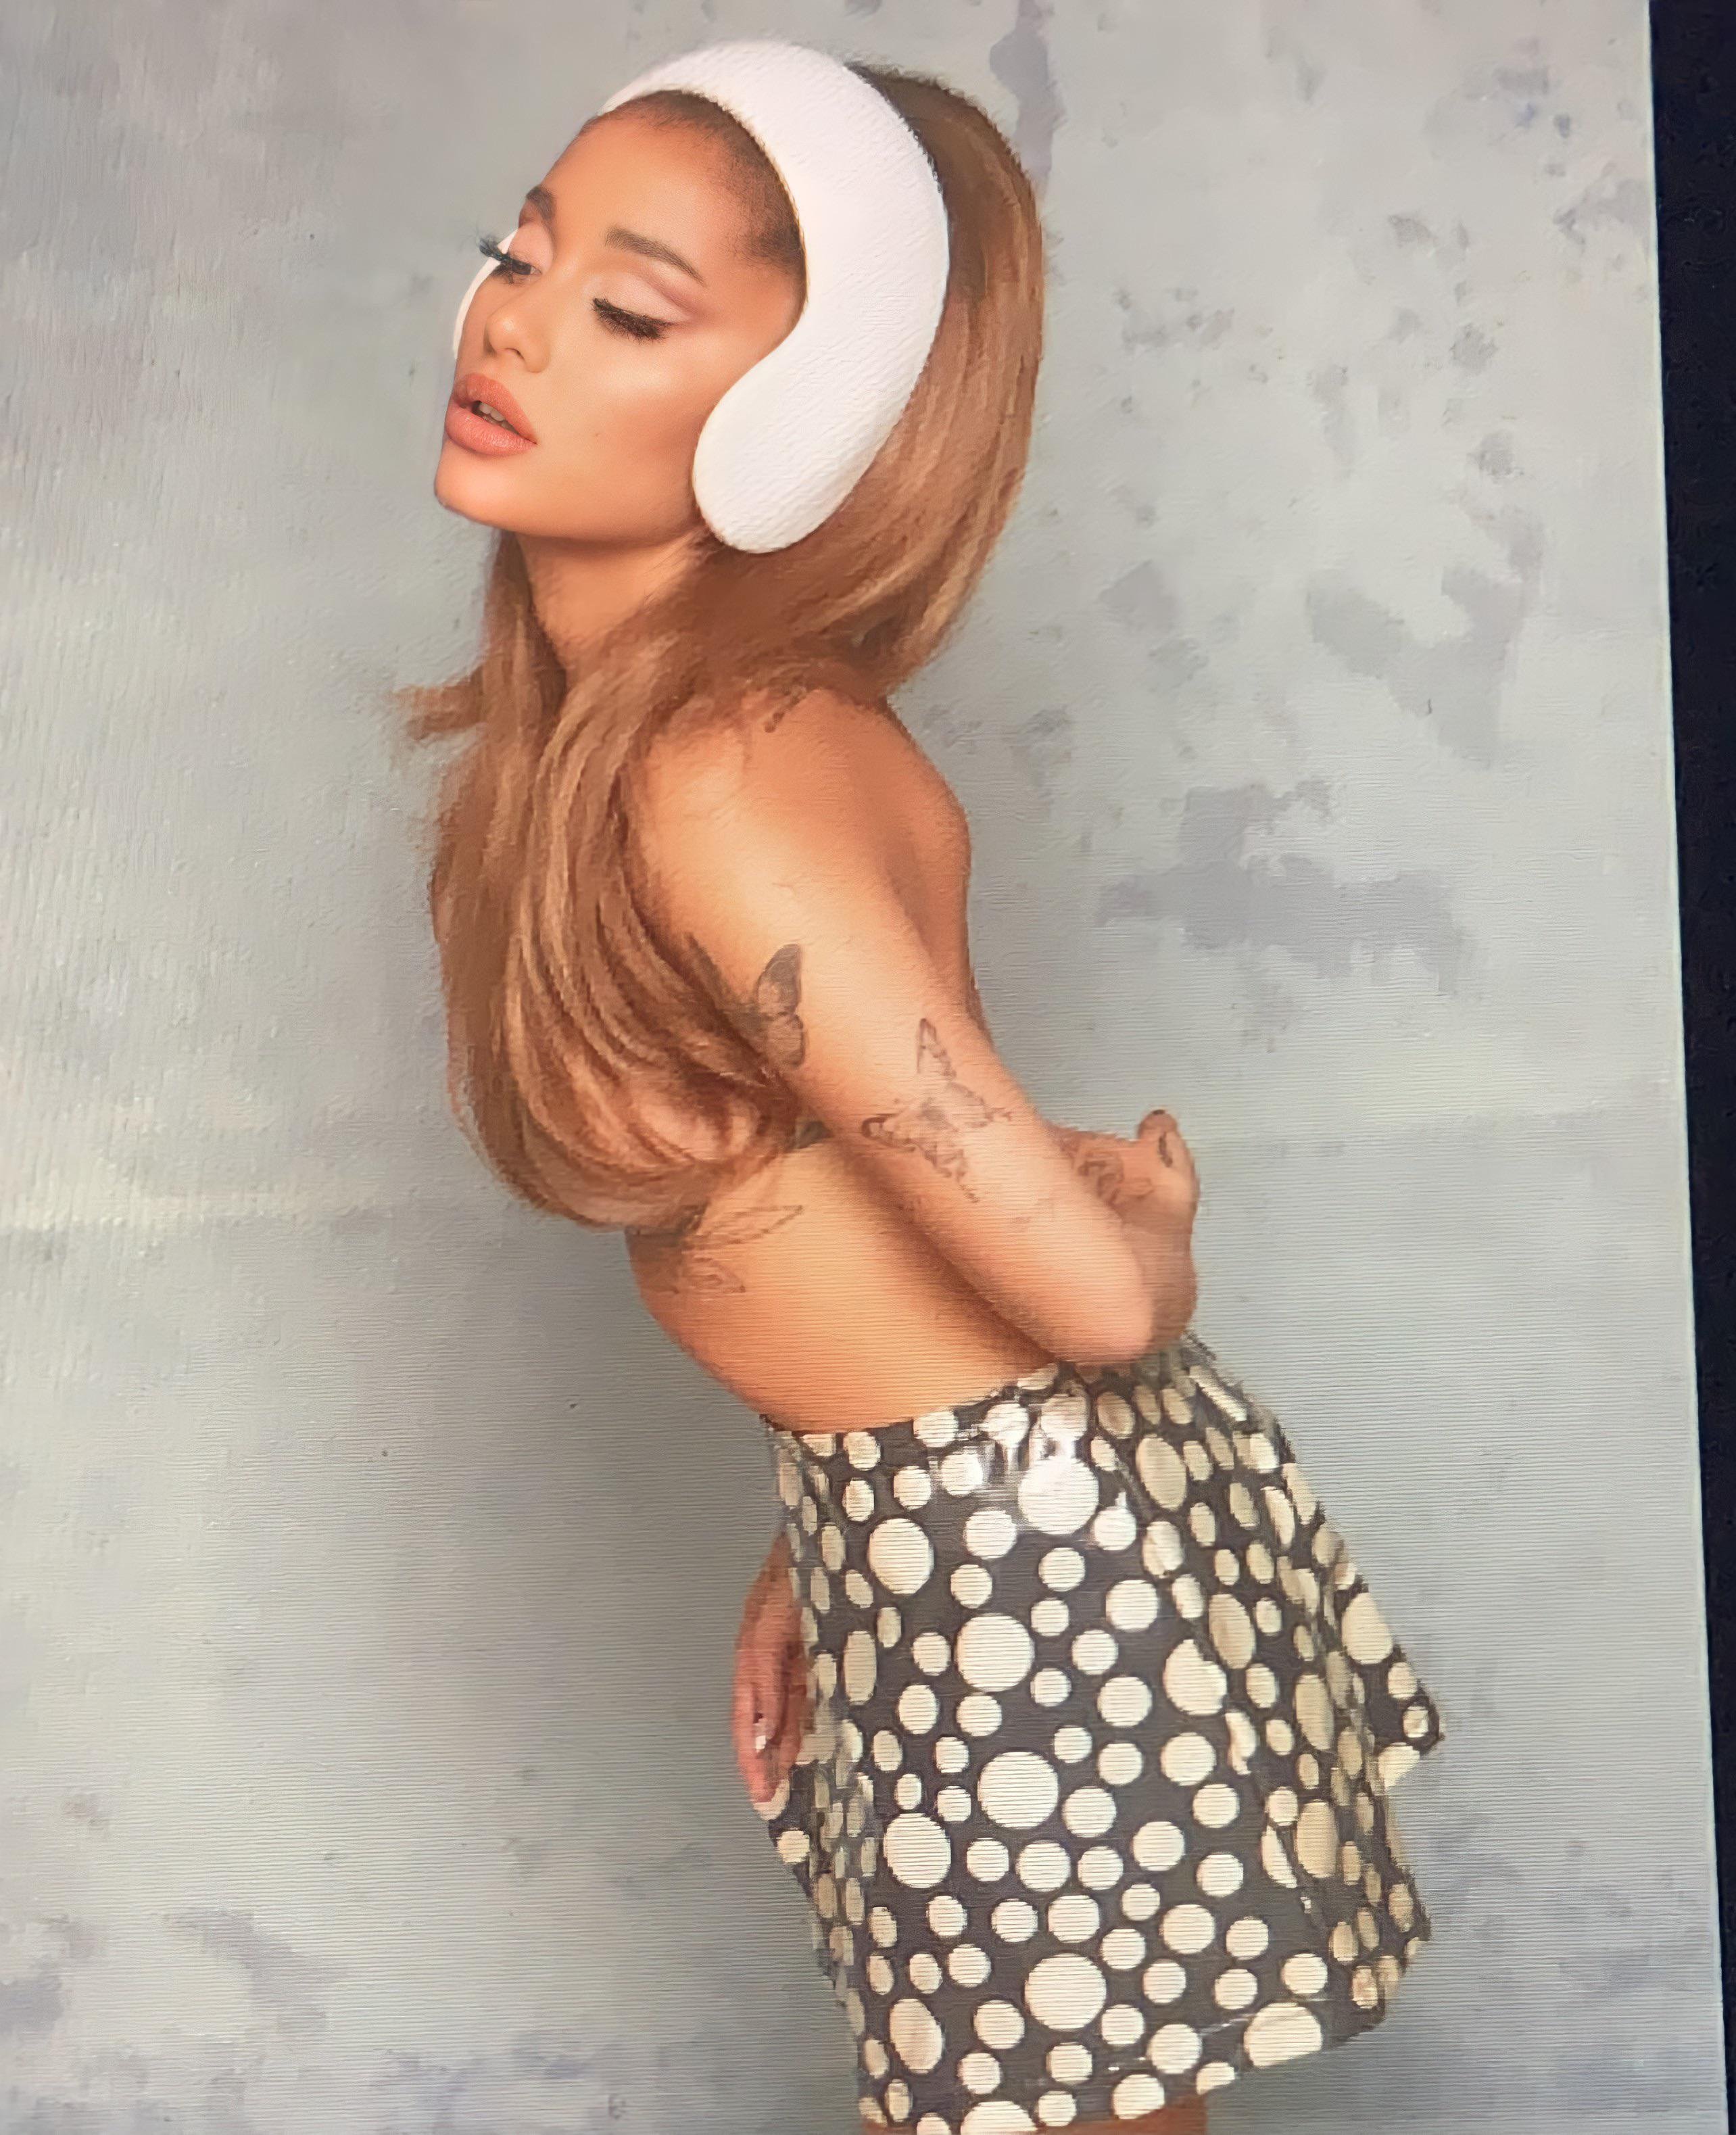 Ariana grande positions photoshoot leaked